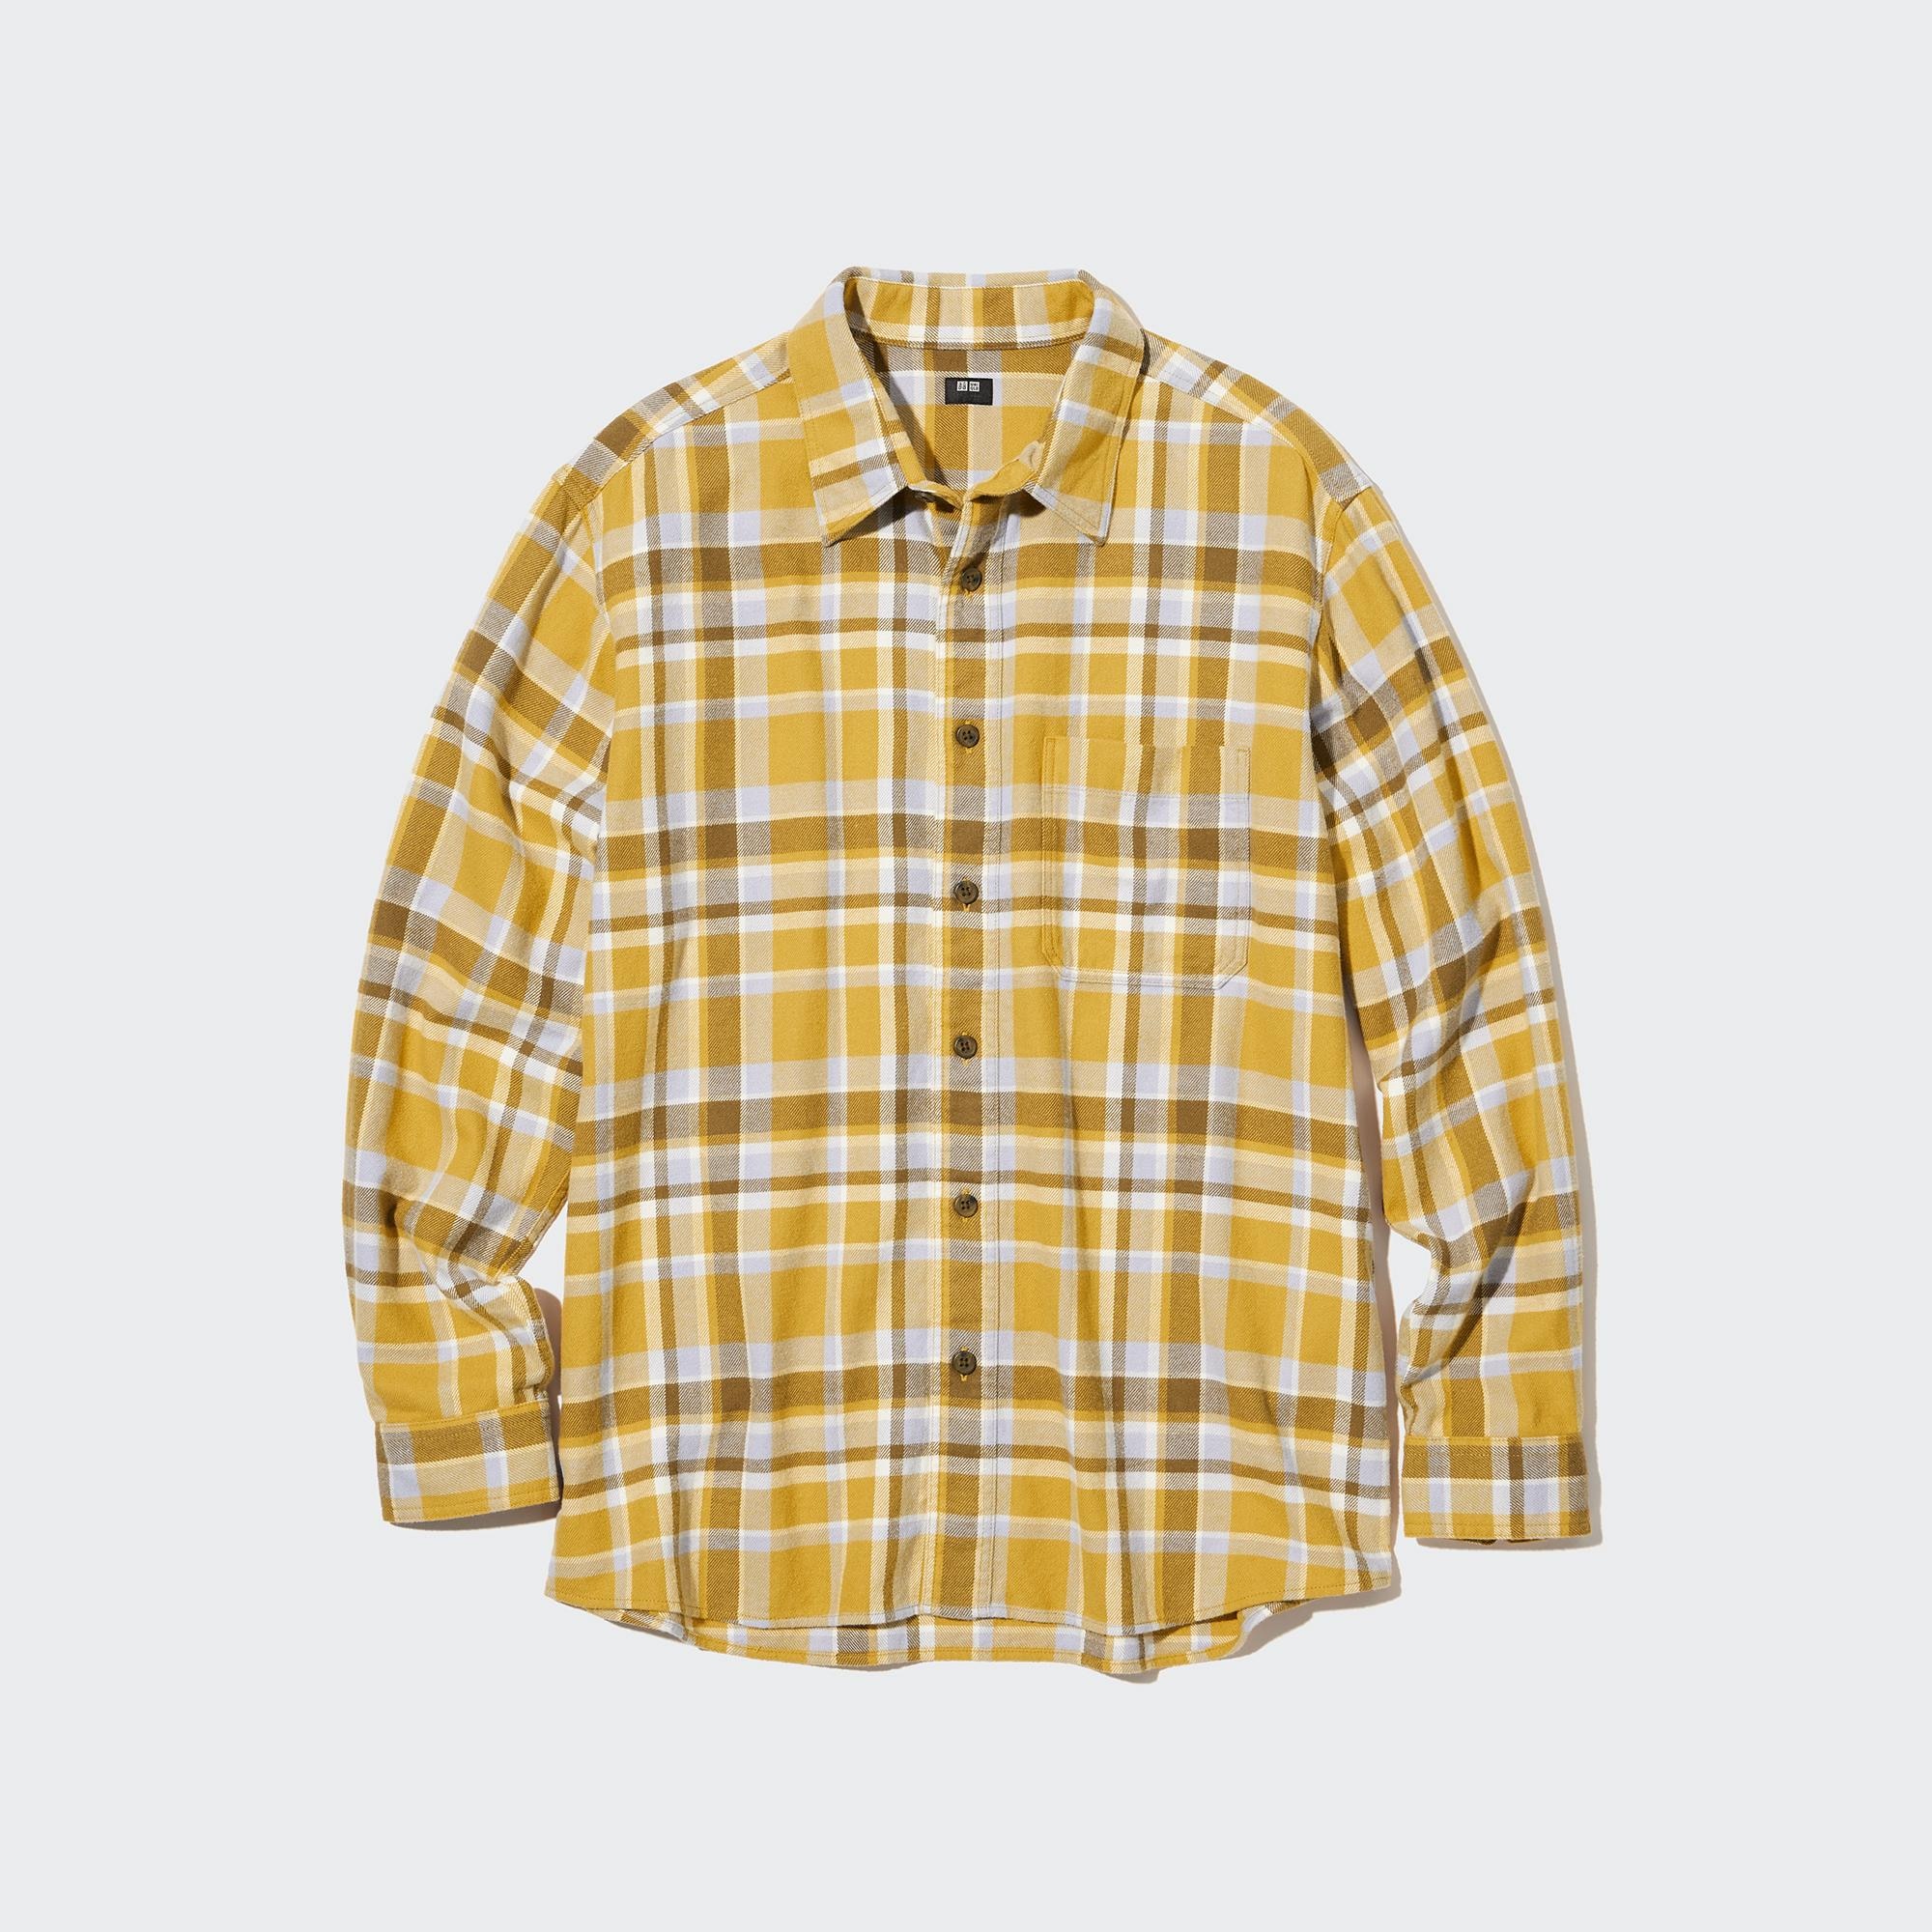 Yellow Plaid Shirt Outfits For Men (71 ideas & outfits)